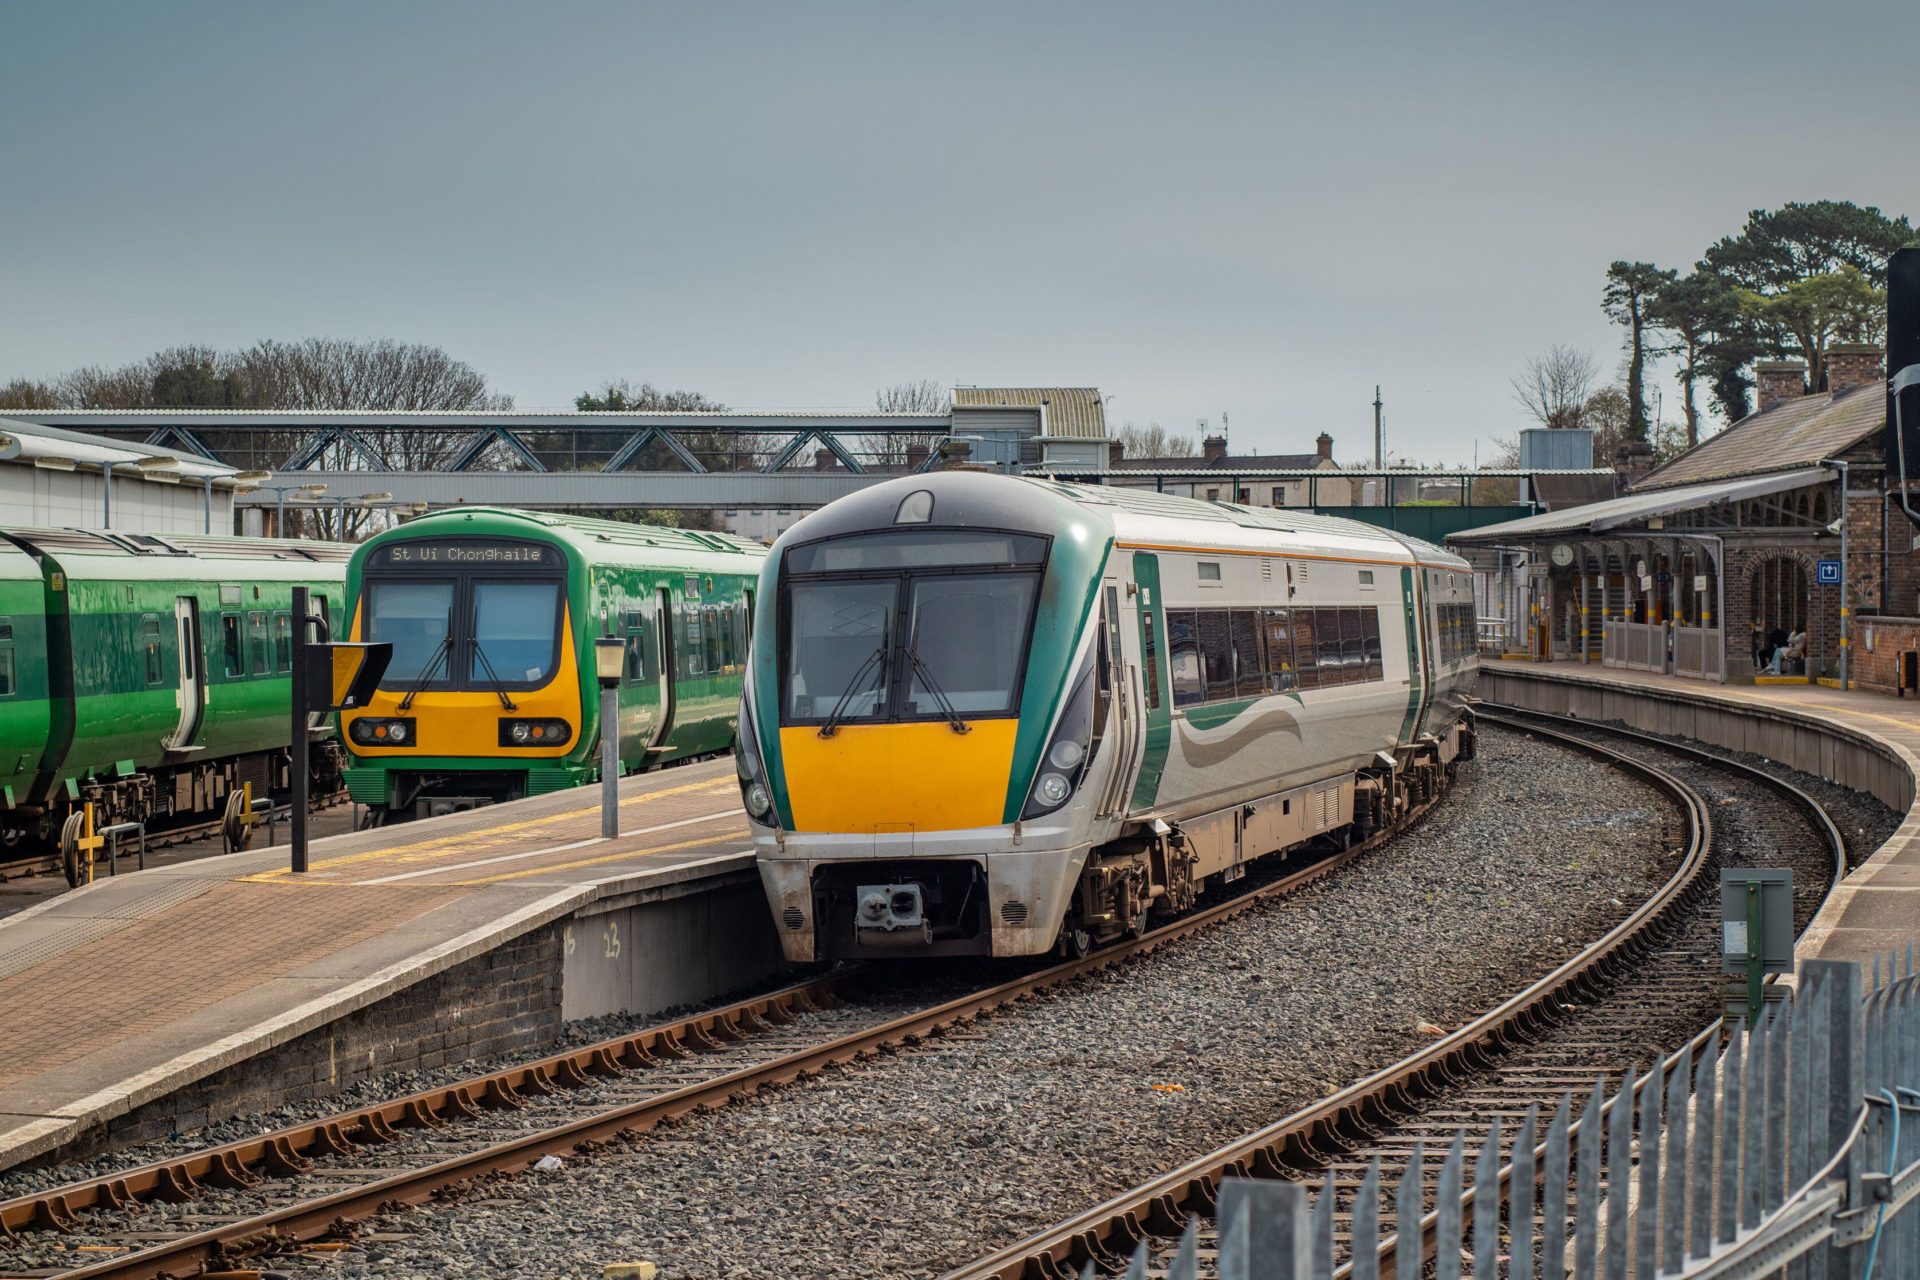 2RMY5R1 Trains on Drogheda macbride train station in ireland, on a line from Dublin to Belfast. Rail platforms and trains passing by on a sunny day.